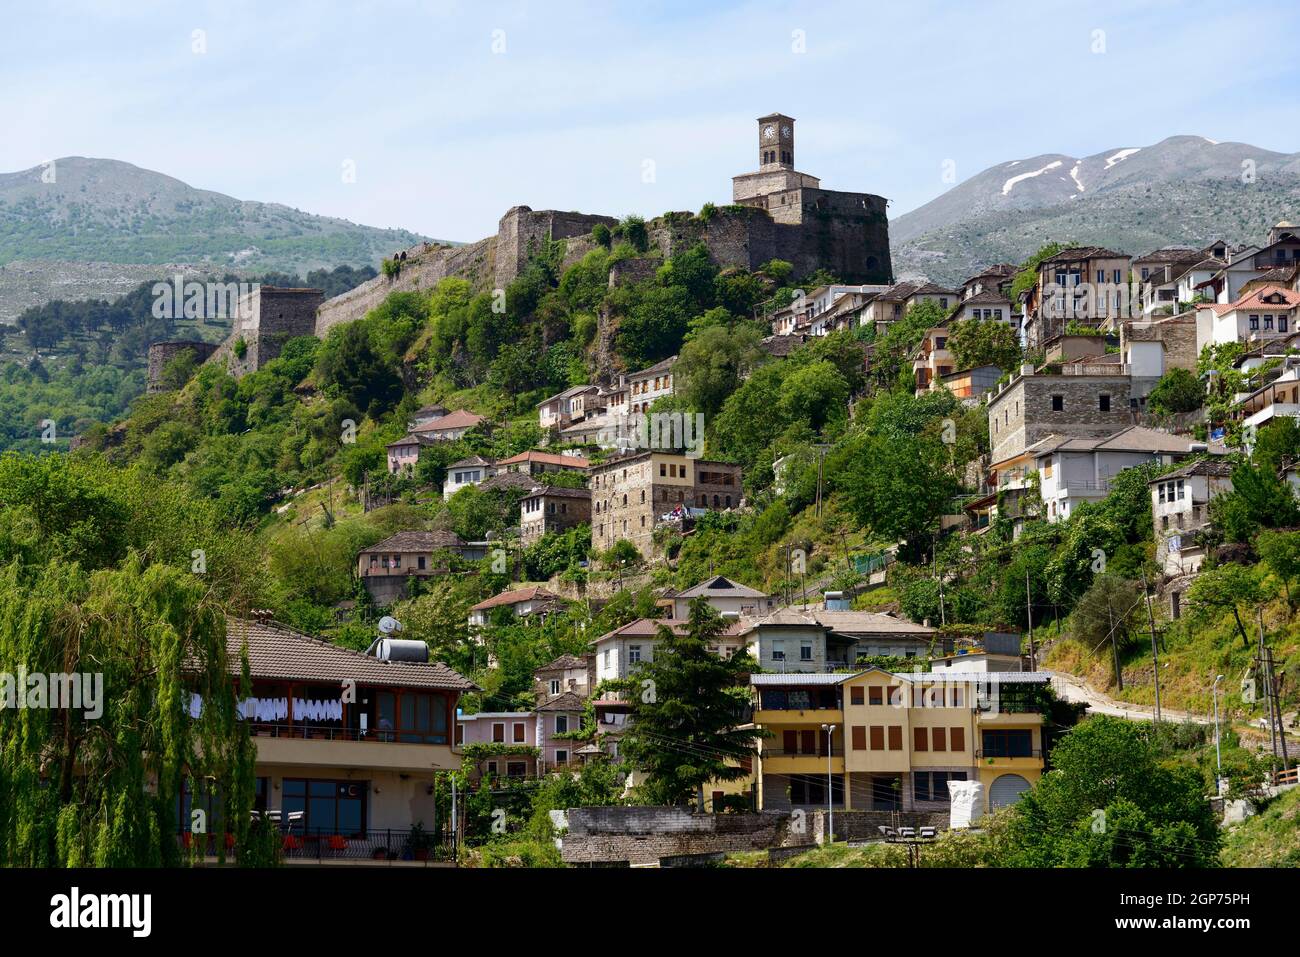 Town with castle hill and clock tower, Gjirokastra, Gjirokaster, Gjirokaster, Albania Stock Photo